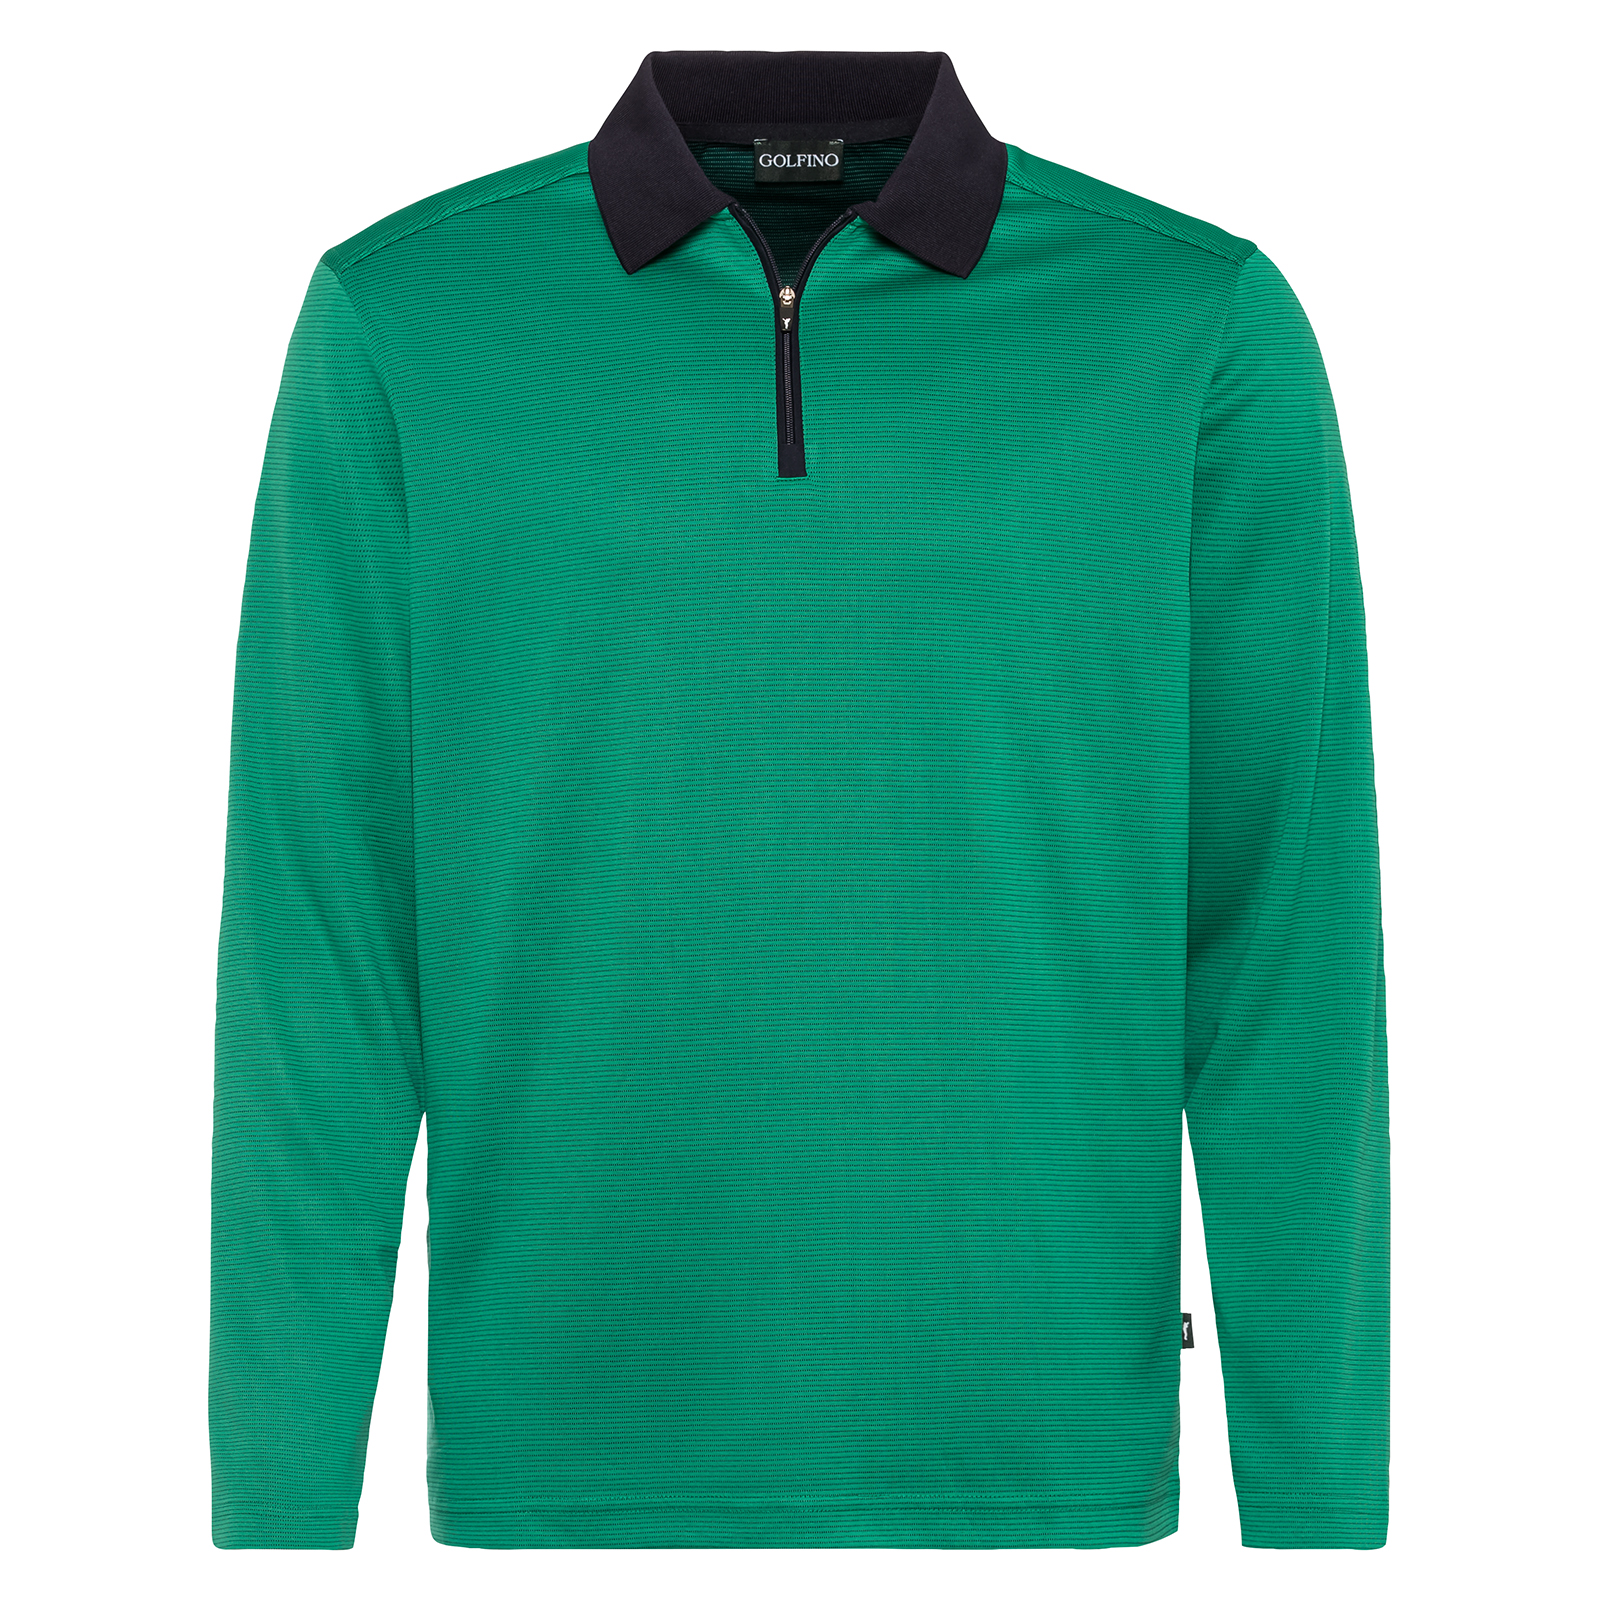 Men's breathable long-sleeved polo shirt in a timeless design 